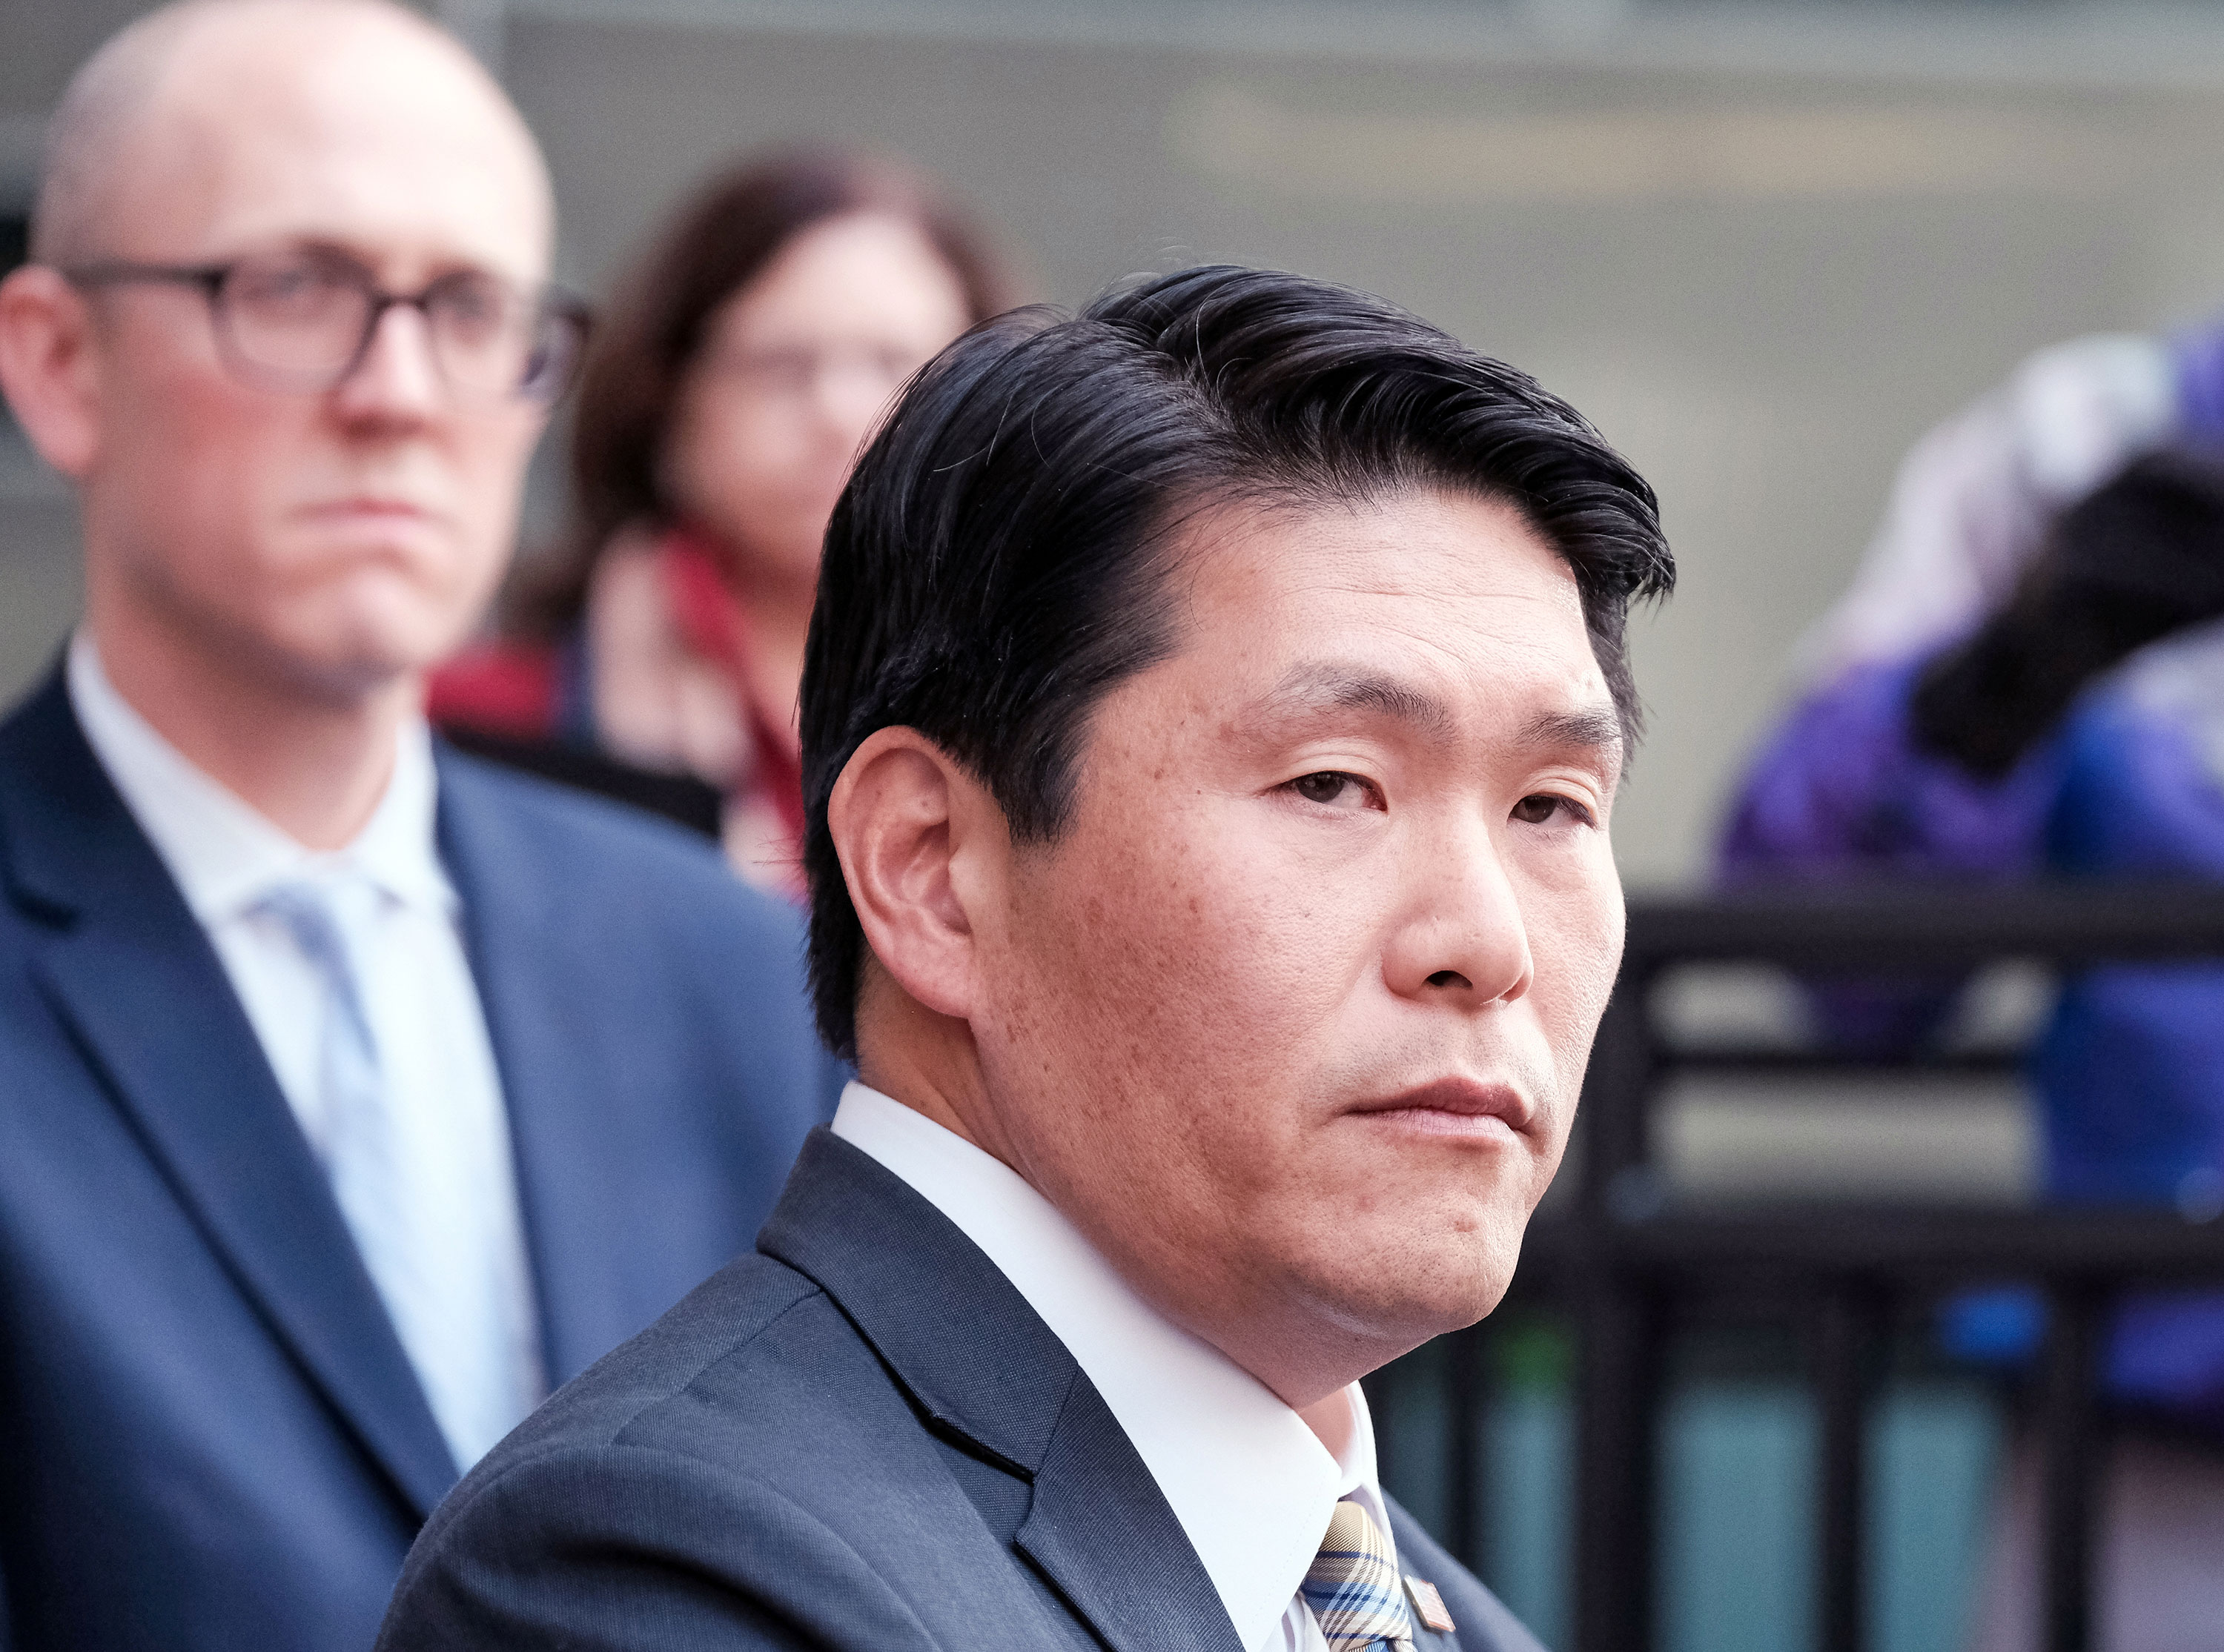 Robert Hur attends a news conference in 2019.